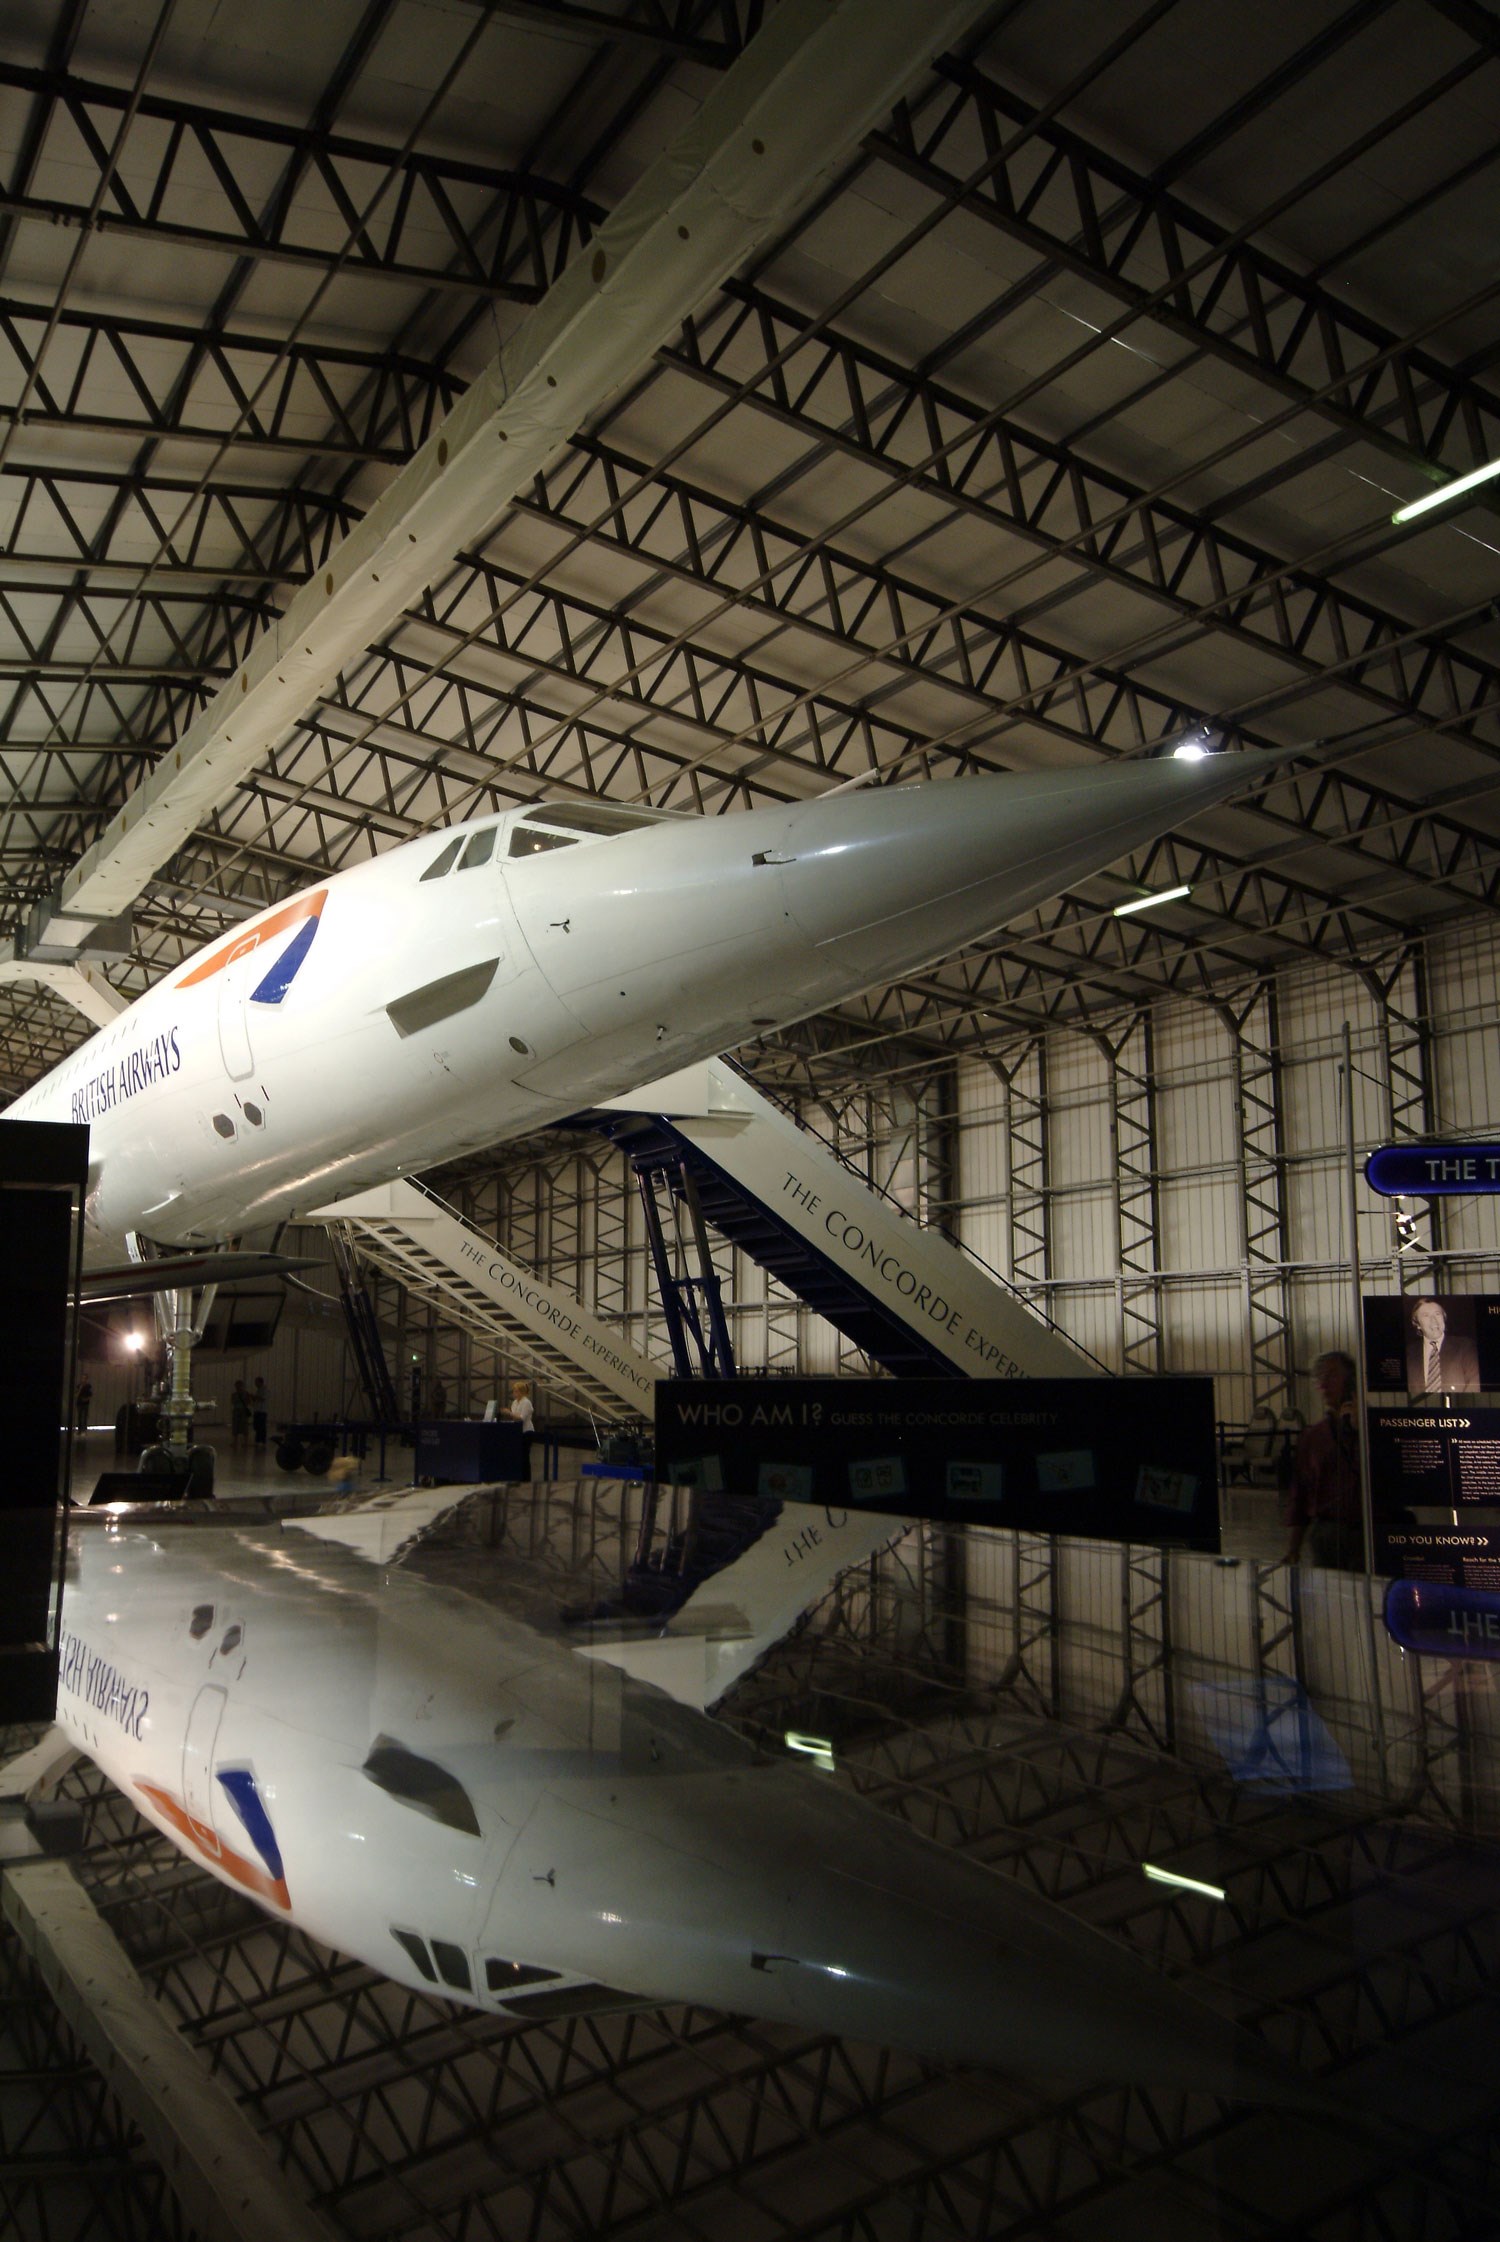 Concorde on display at National Museum of Flight